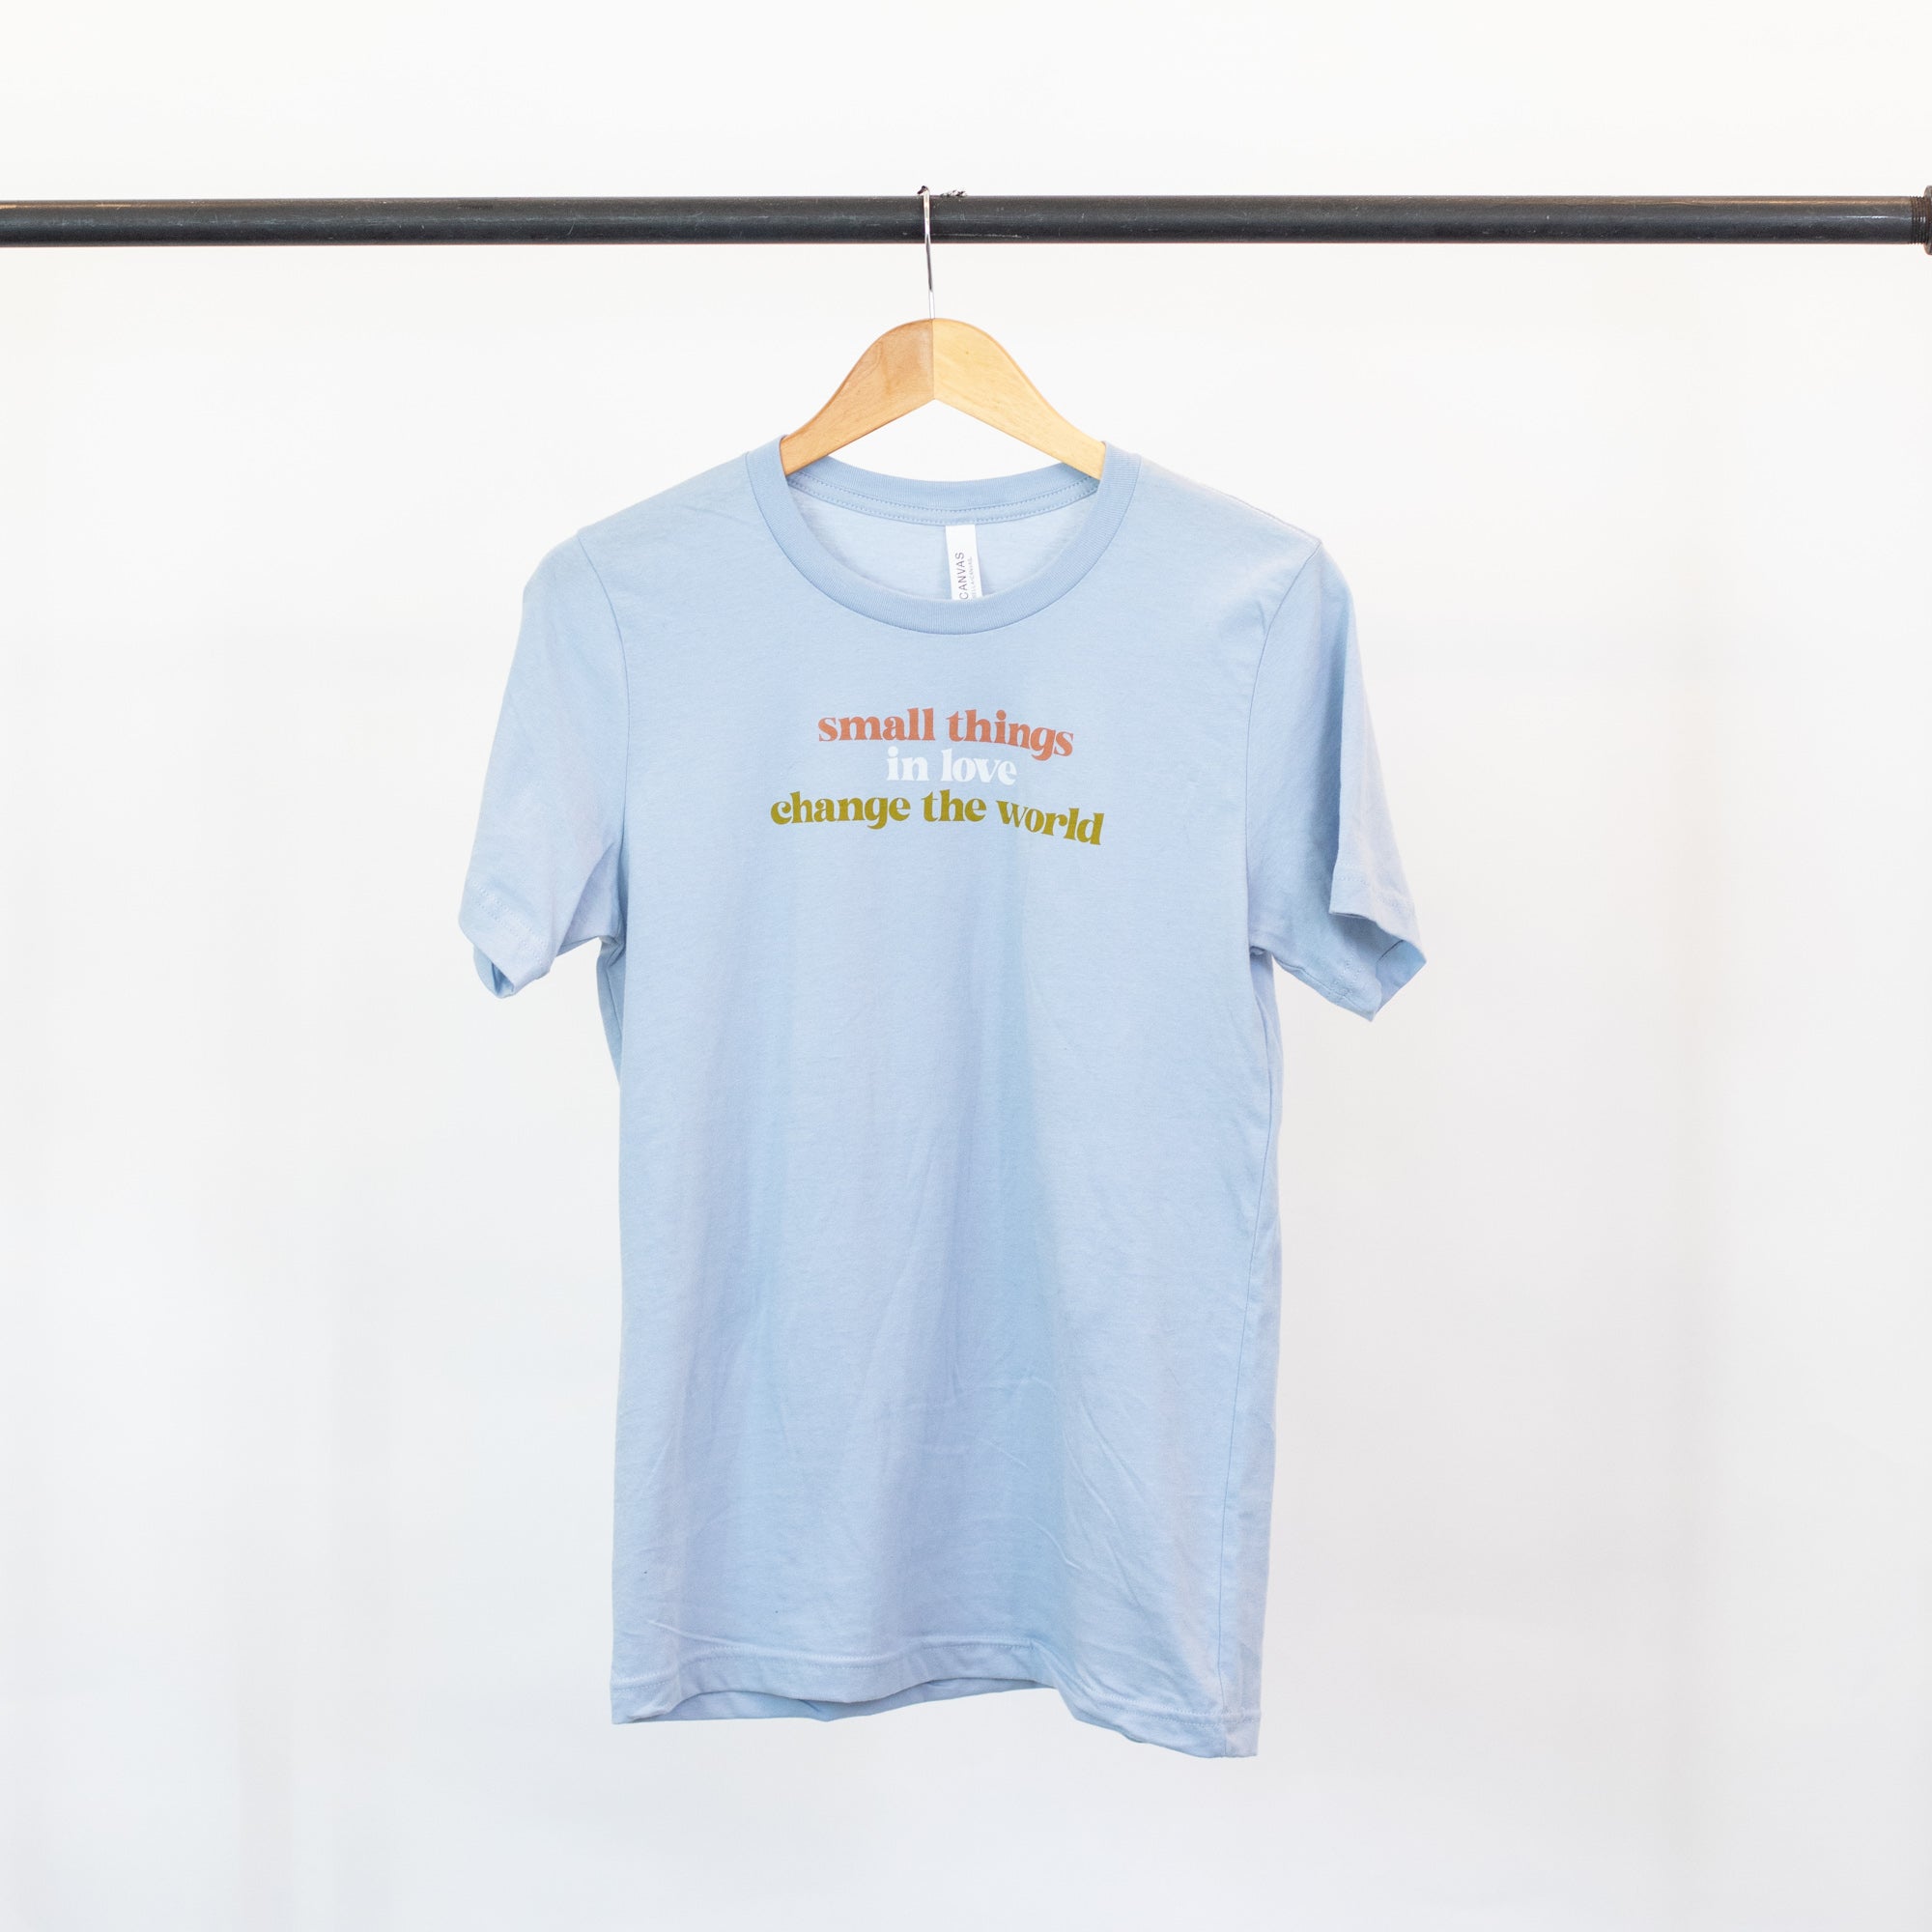 "Small Things in Love Change the World" T-Shirt